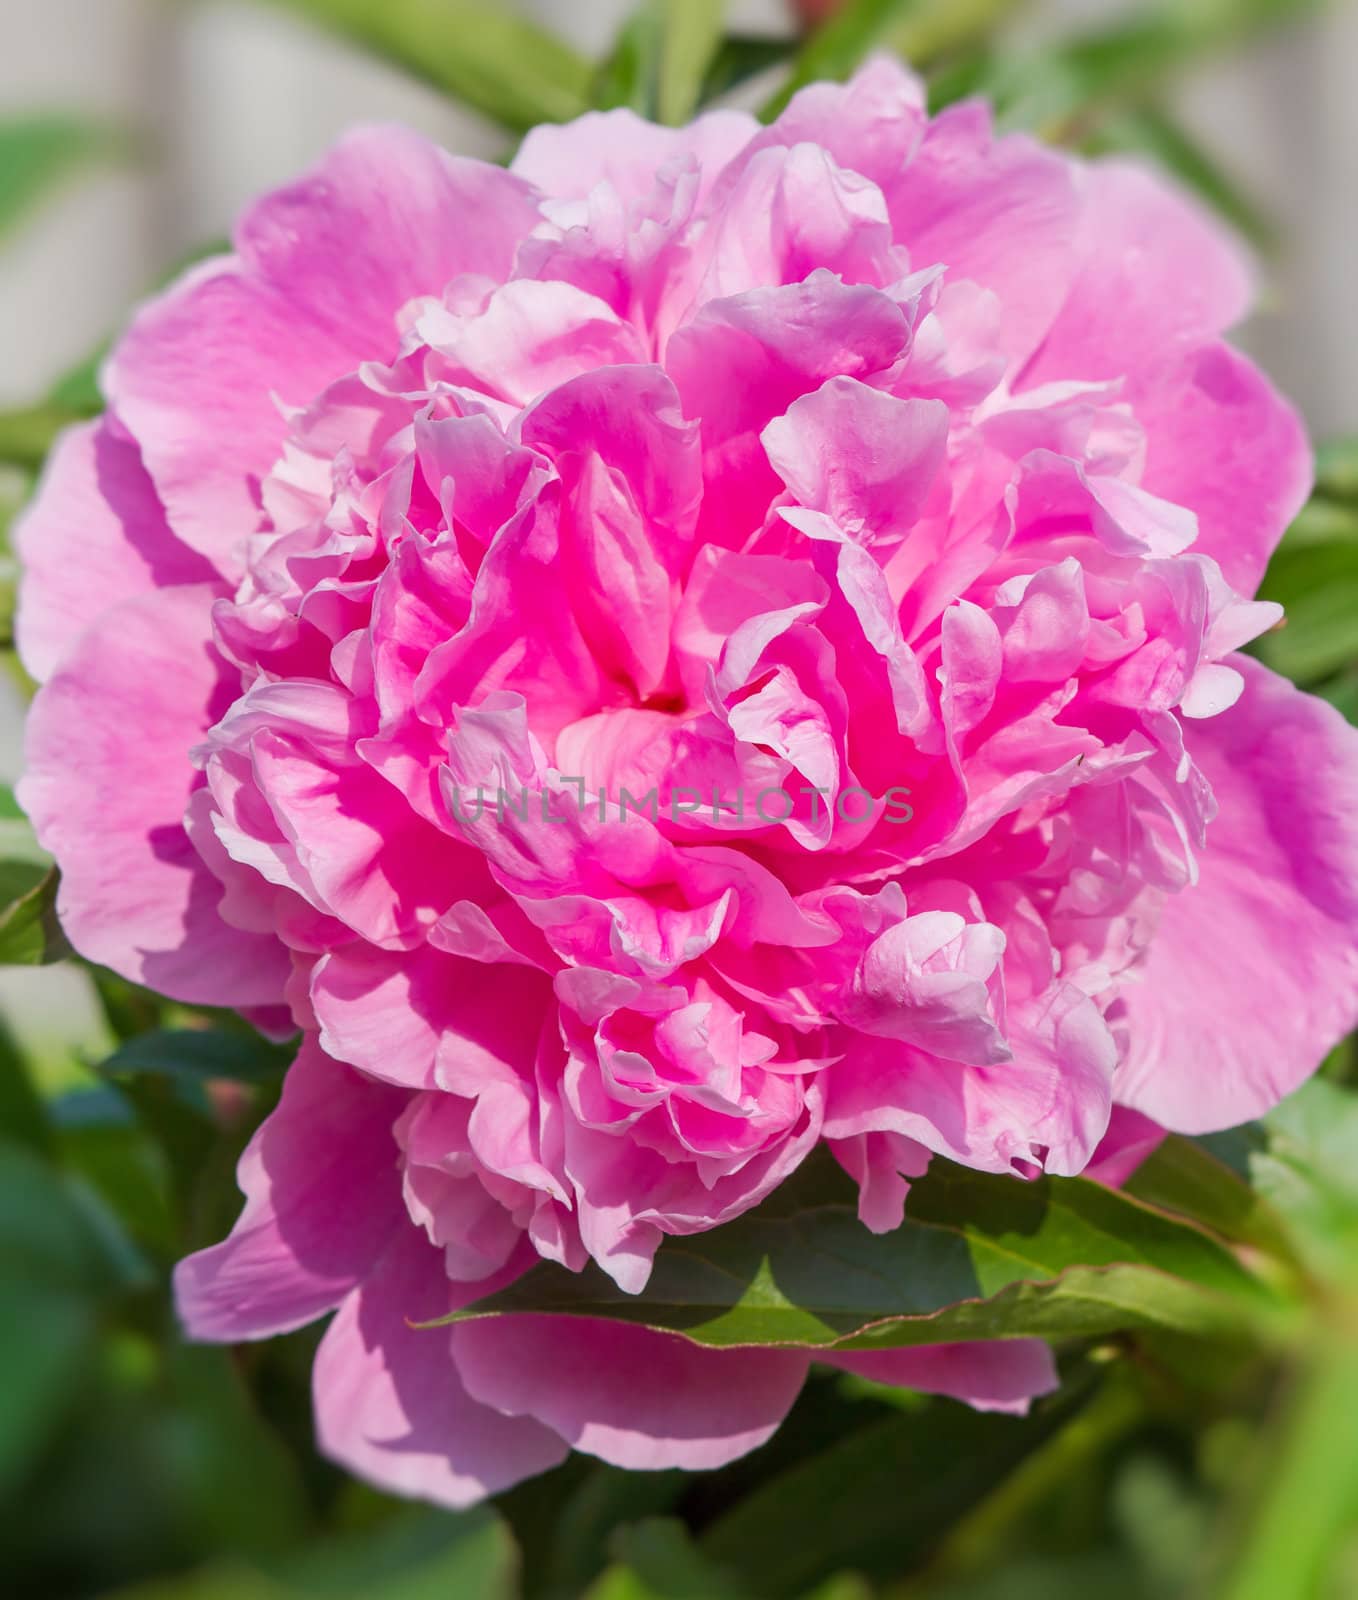 Big pink peony flower in garden with shallow focus